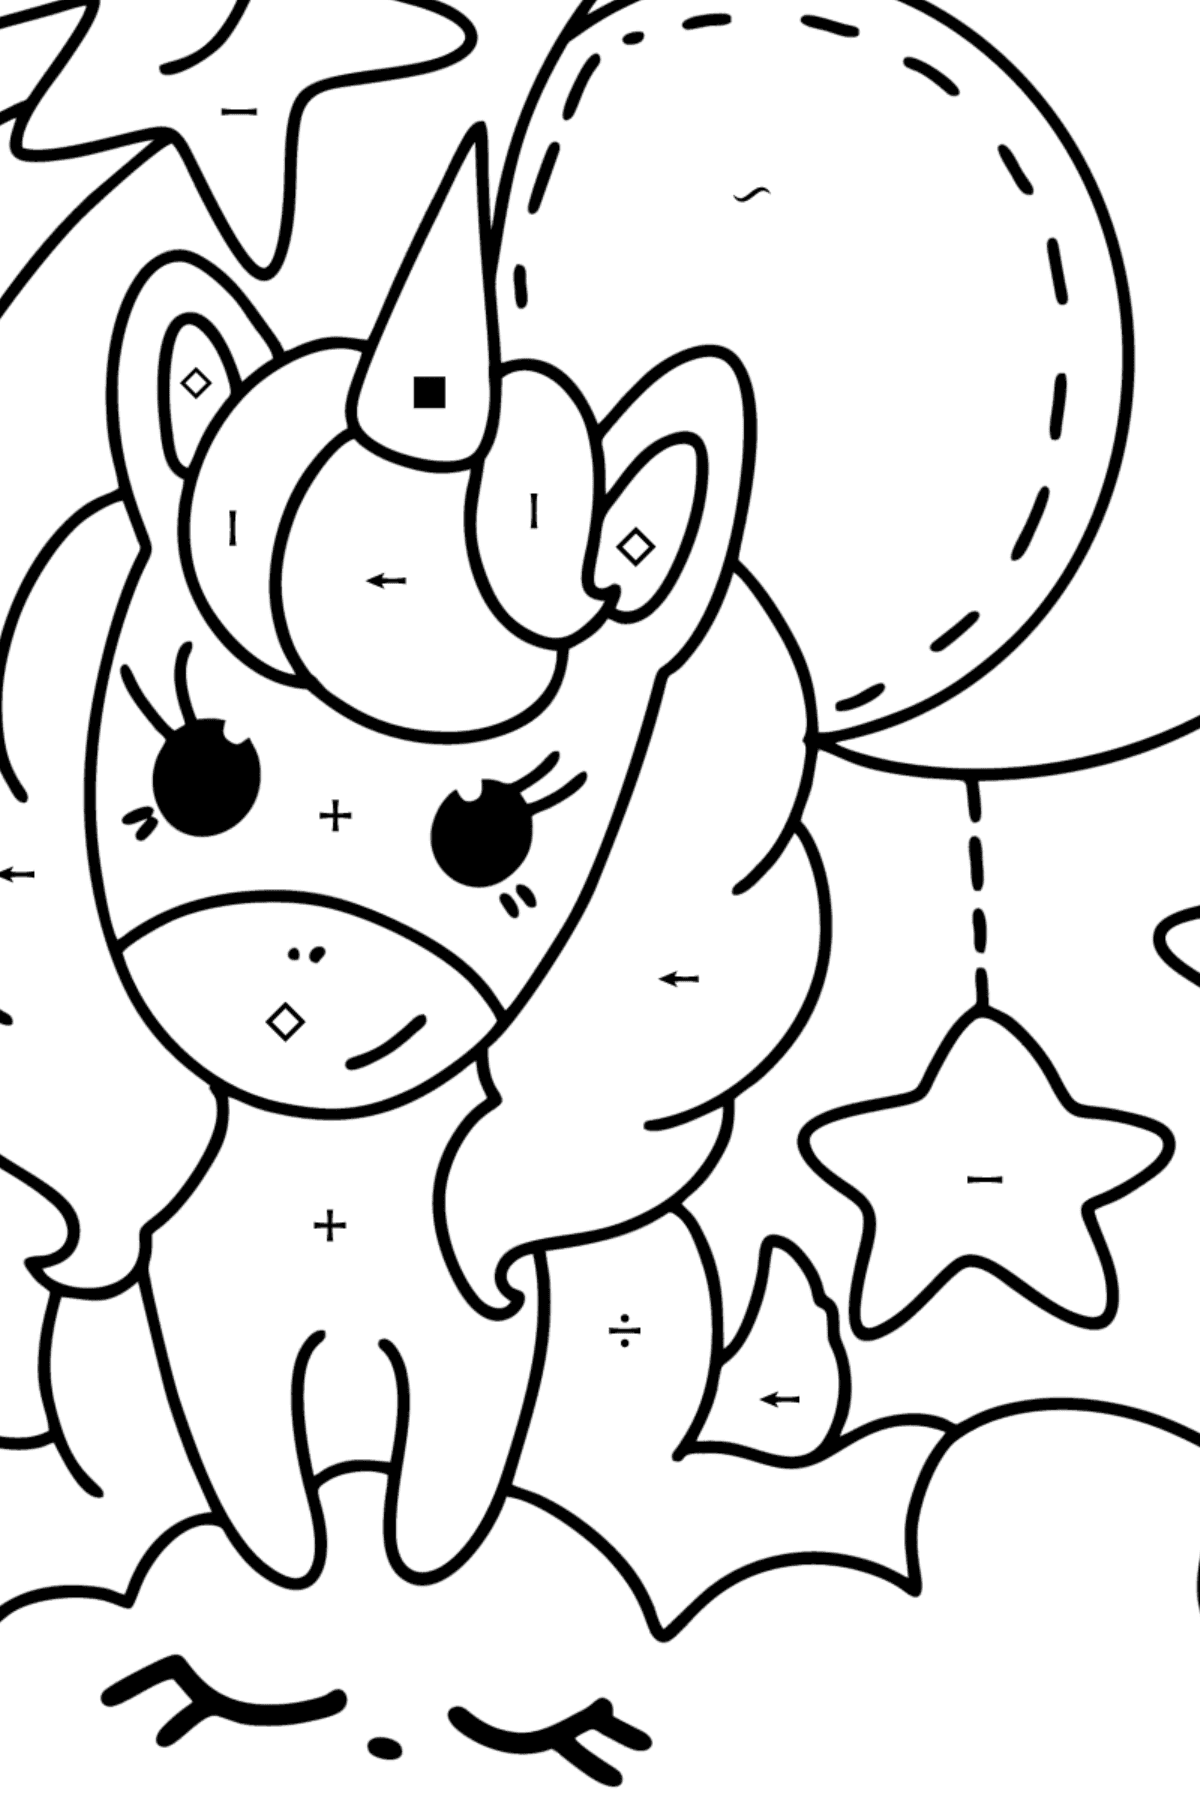 Moon unicorn coloring page - Coloring by Symbols for Kids